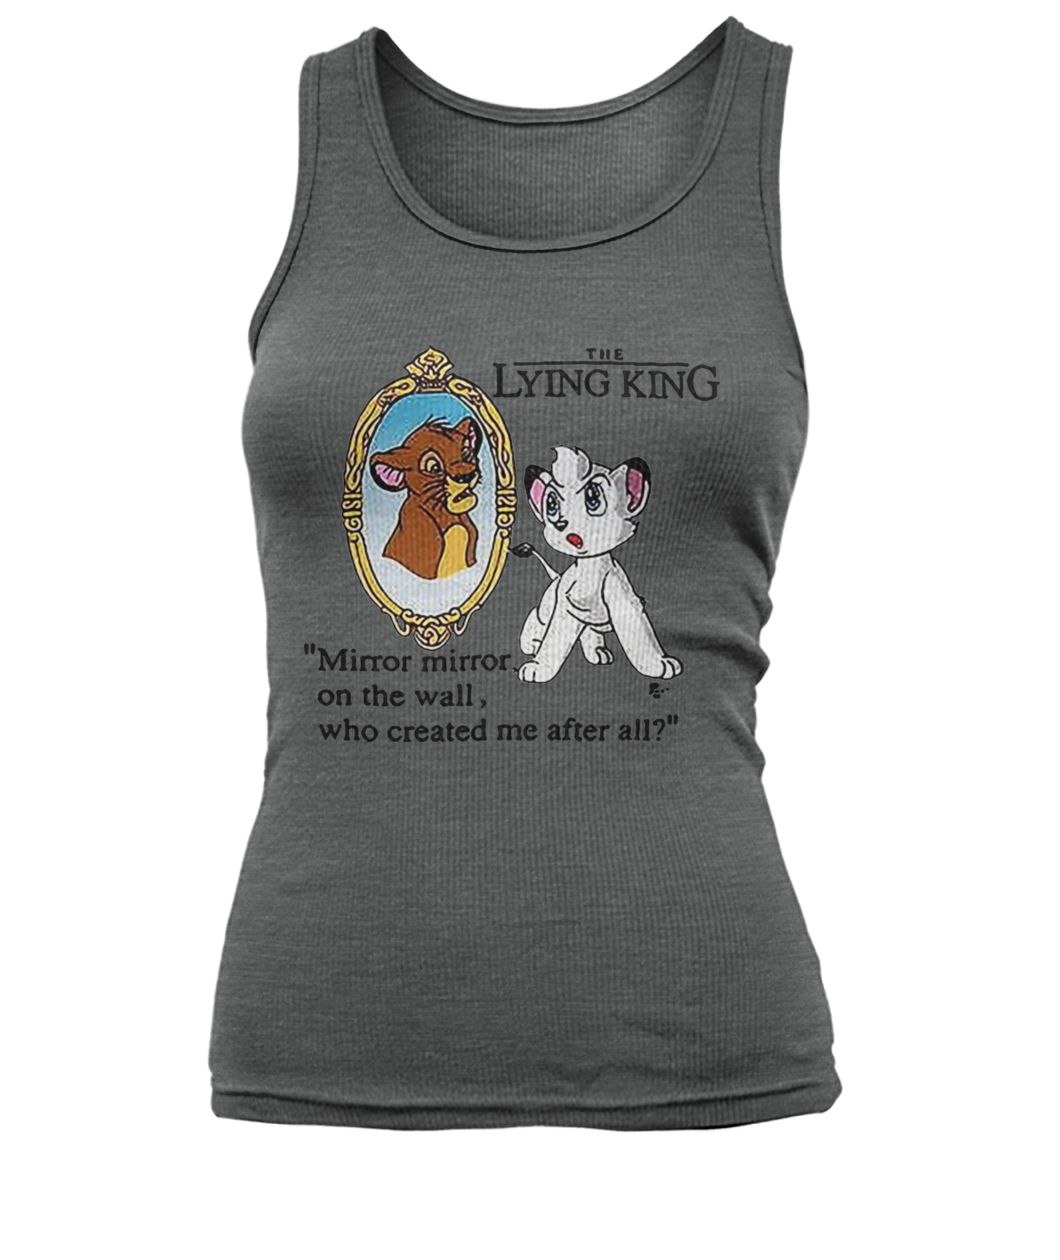 The lying king mirror mirror on the wall who created me after all the lion king women's tank top